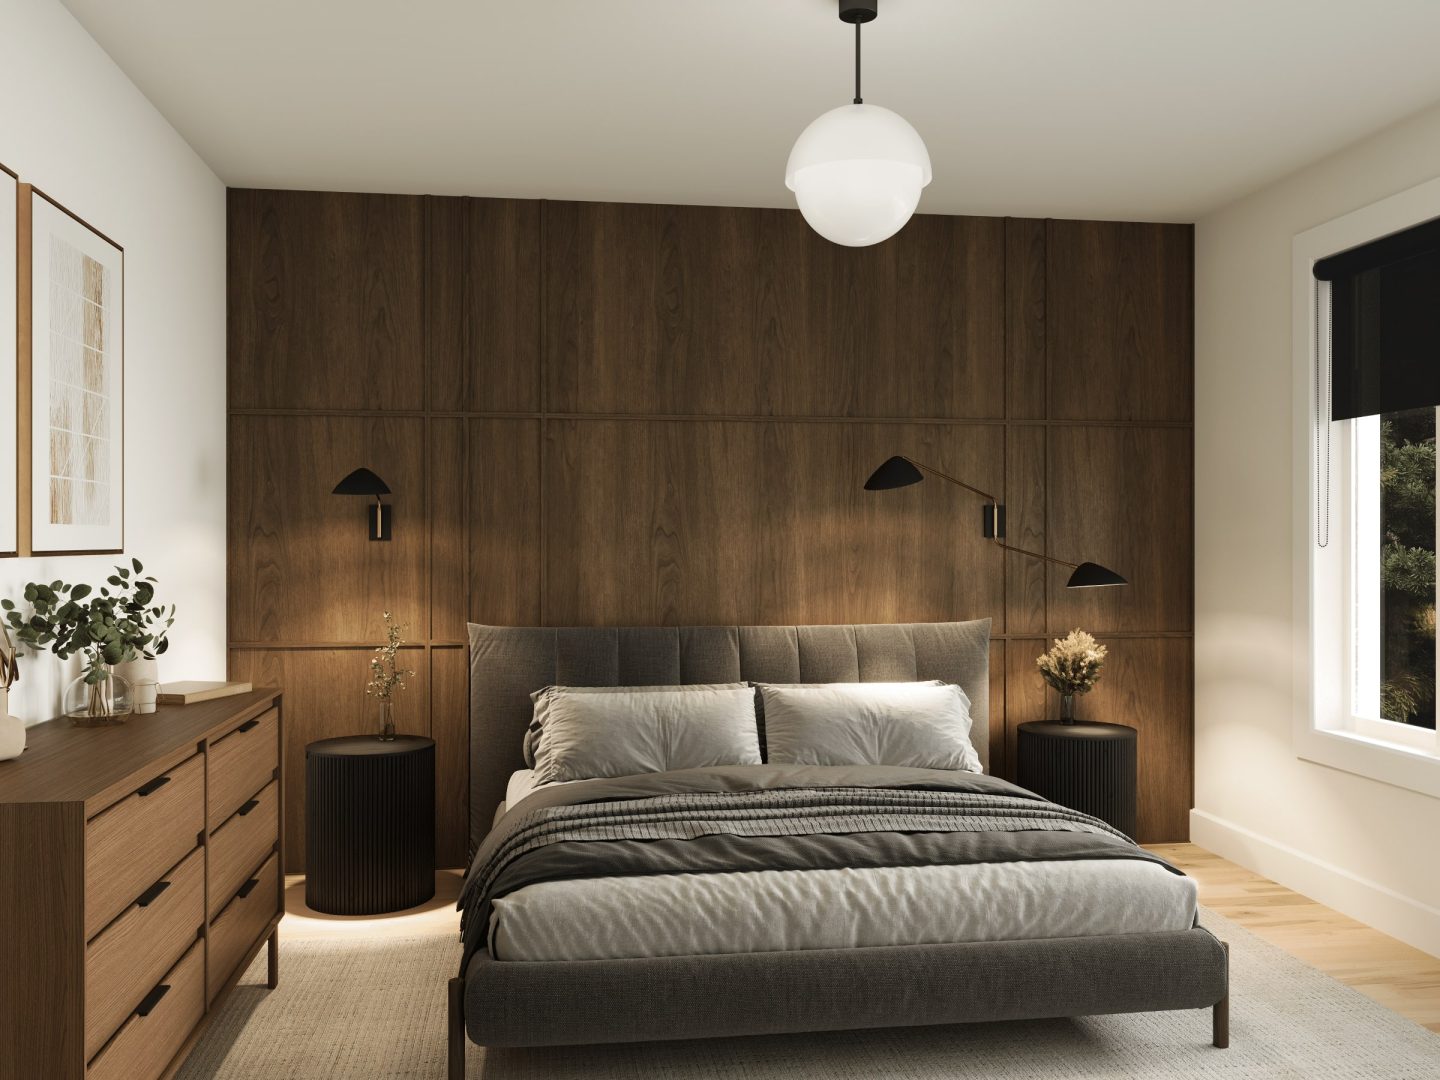 The Svalla model is a midcentury-style chalet. View of the master bedroom